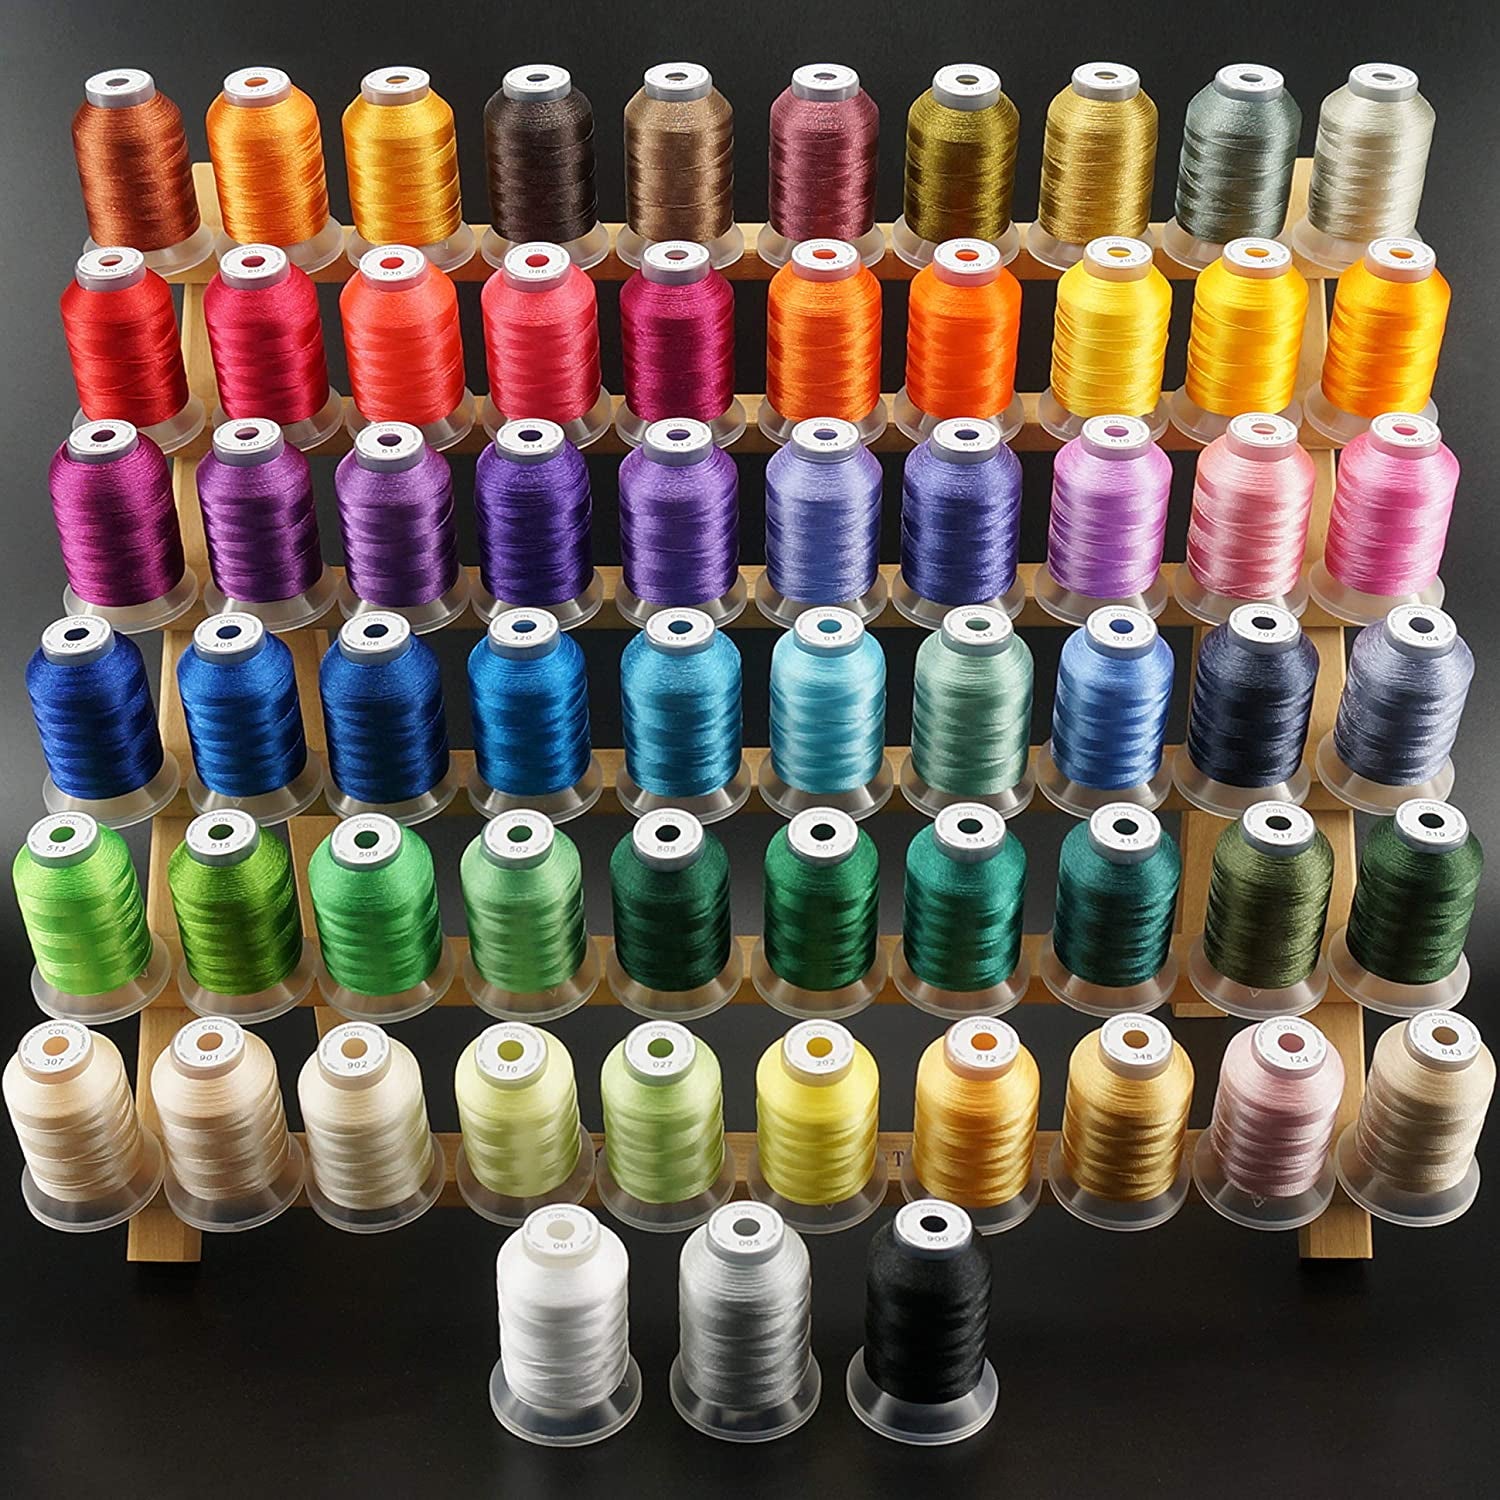 63 Brother Colors Polyester Embroidery Machine Thread Kit 500M (550Y) Each Spool for Brother Babylock Janome Singer Pfaff Husqvarna Bernina Embroidery and Sewing Machines